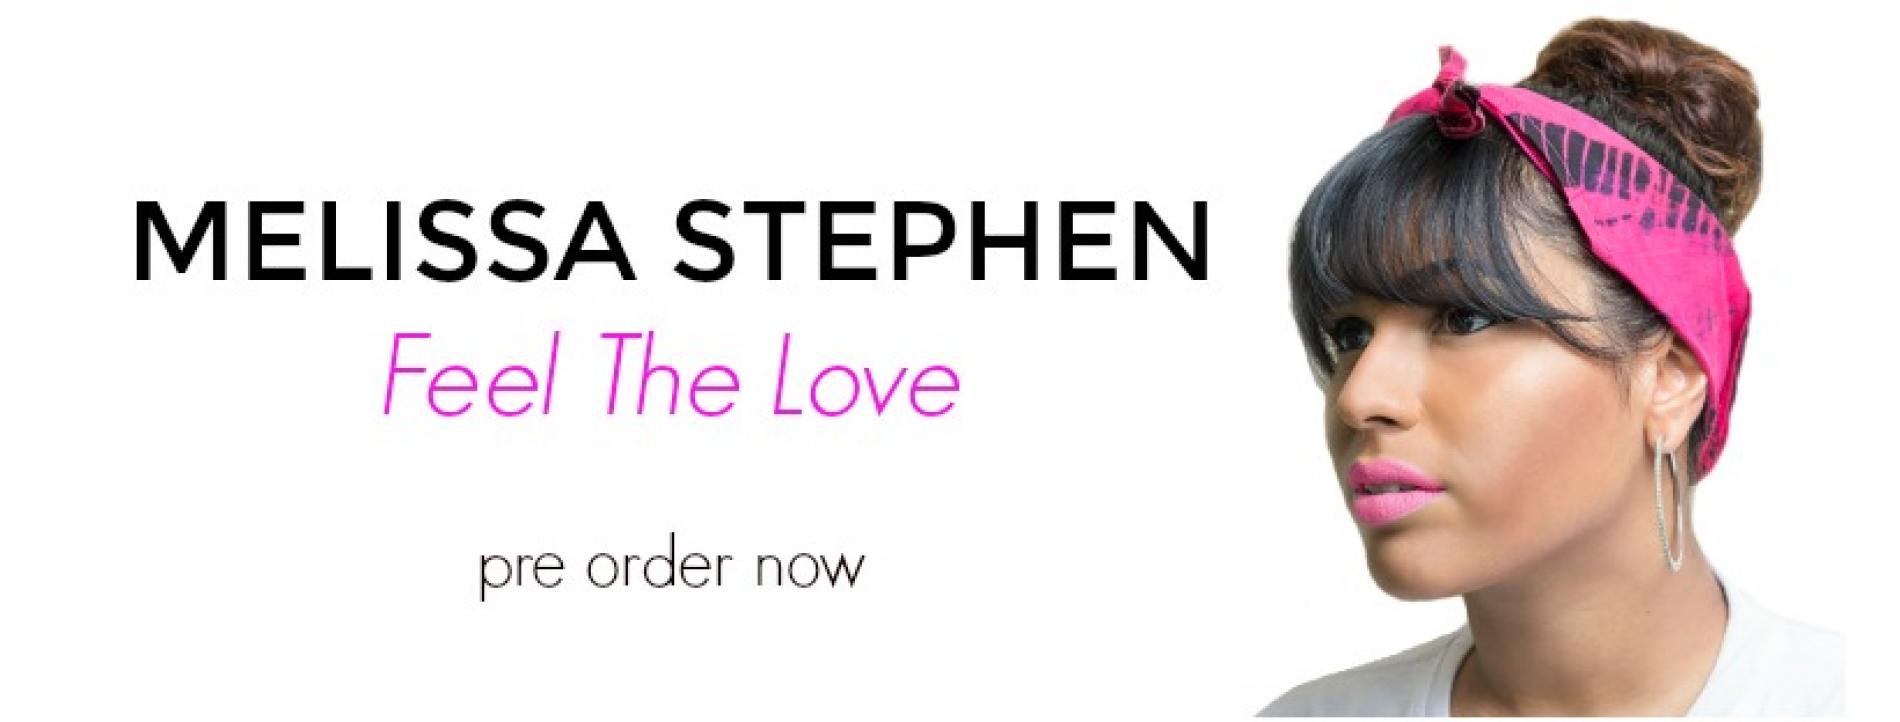 Melissa Stephen Has A New Single Dropping